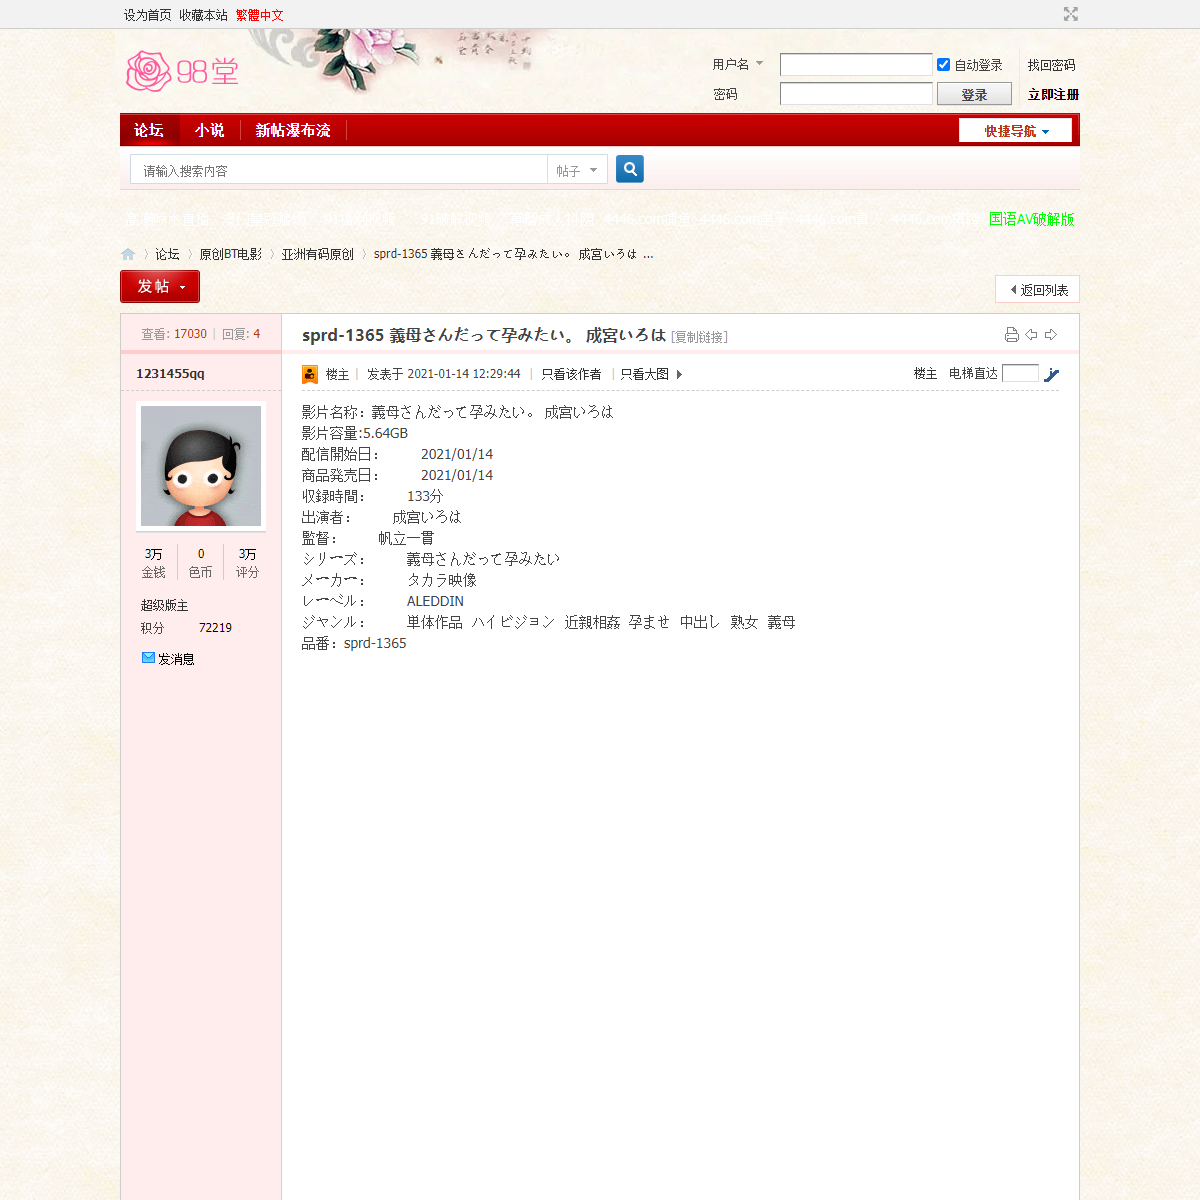 A complete backup of https://www.sehuatang.net/thread-442911-1-1.html